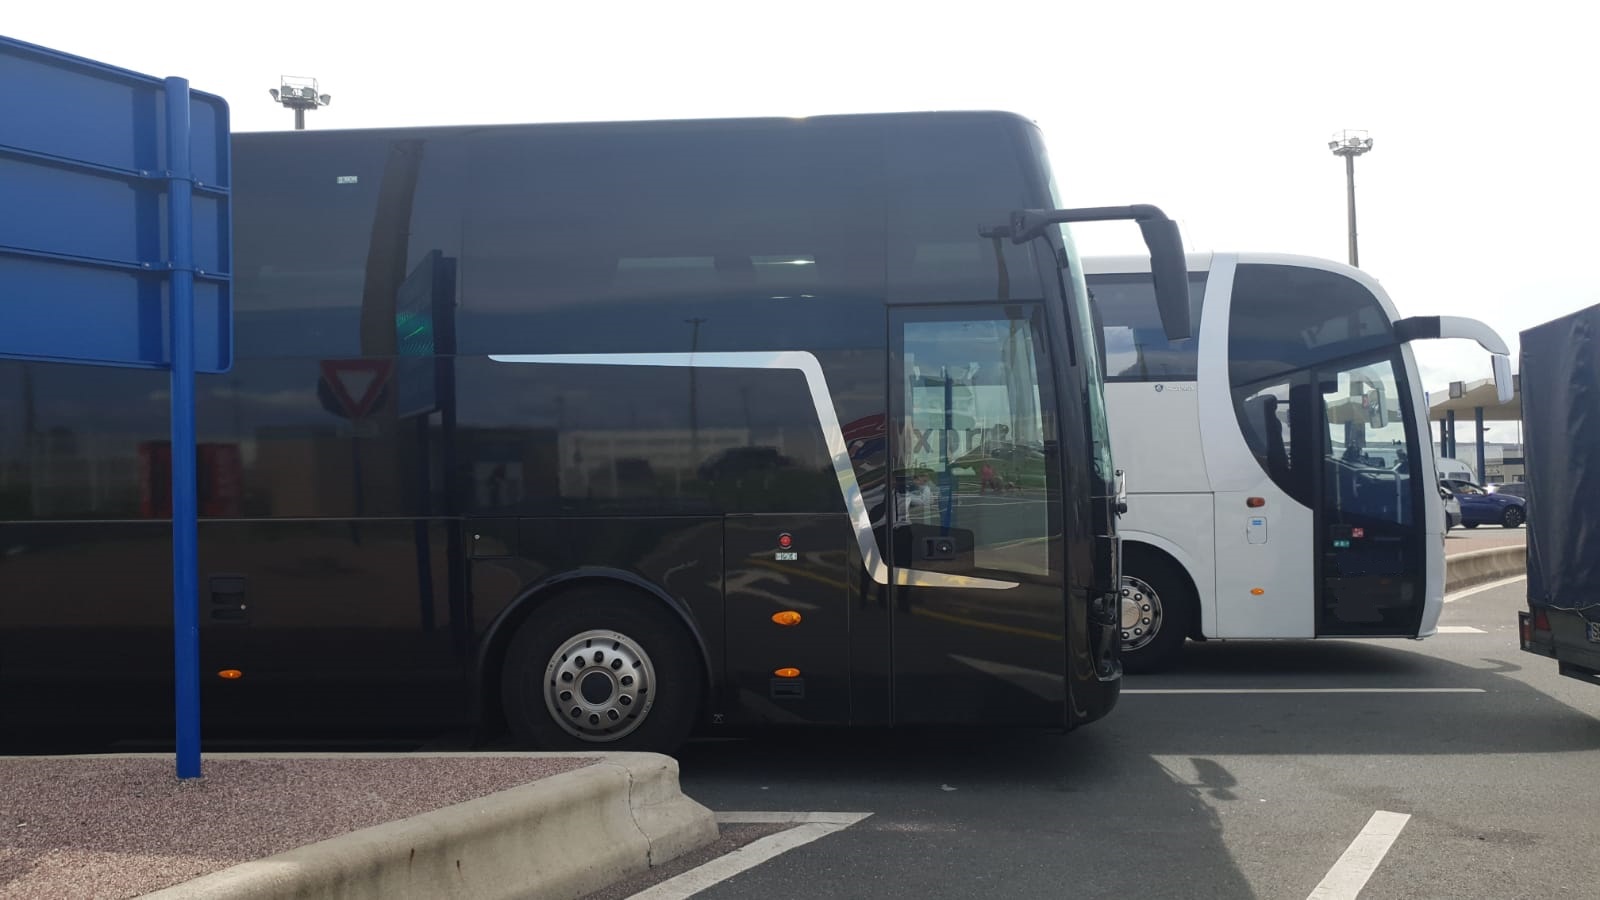 rent buses in Bremerhaven and Bremen with our coach company